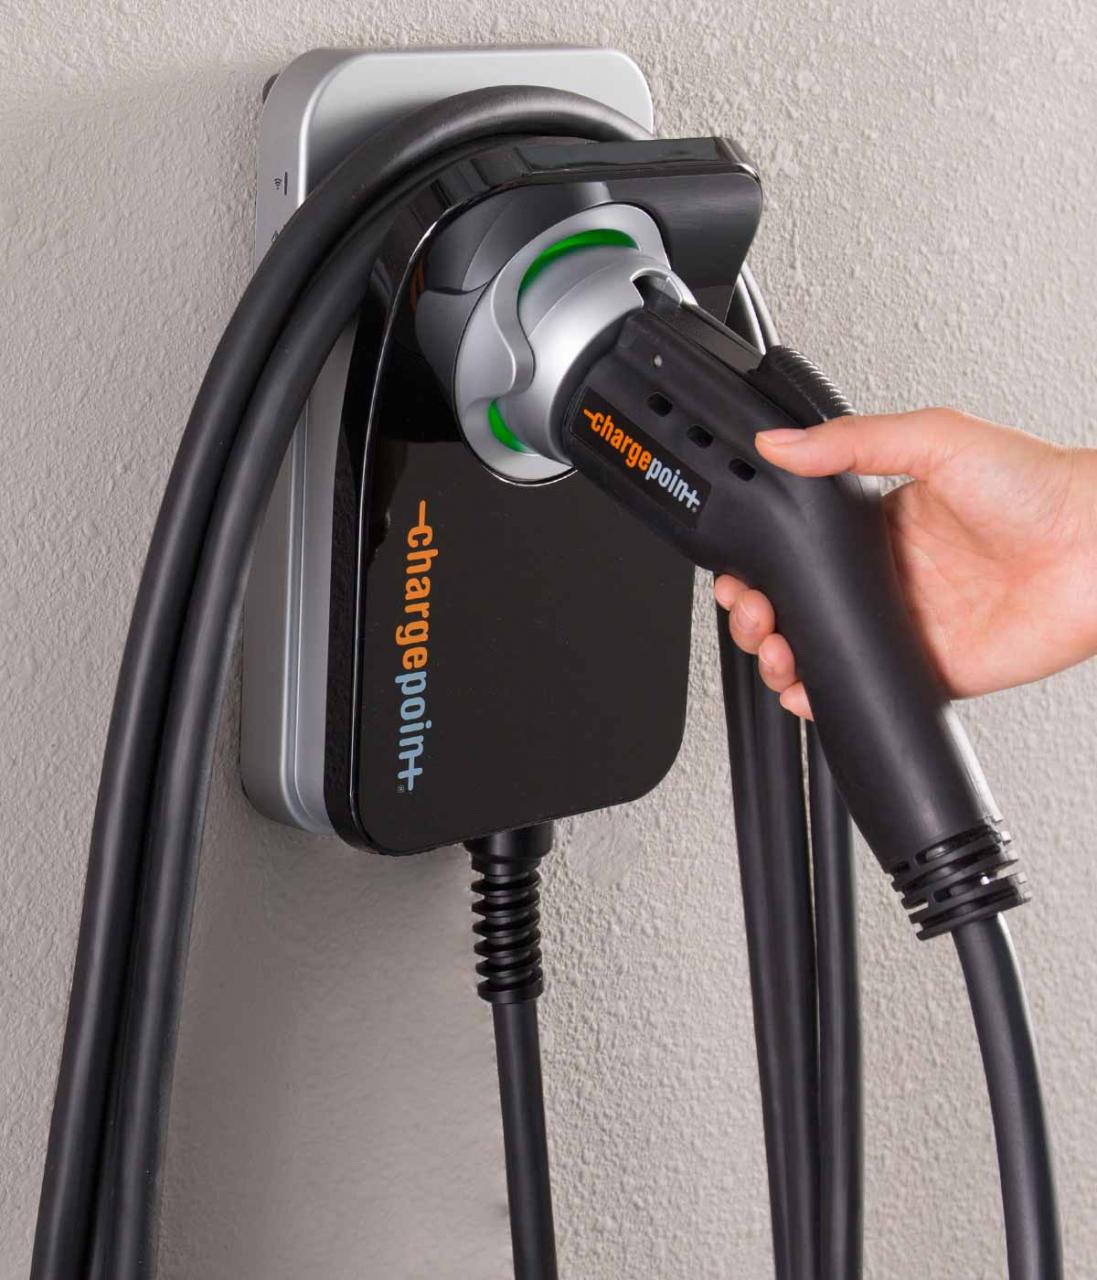 ChargePoint Home 25 Hardwire - 9.00 - Smart Charge America